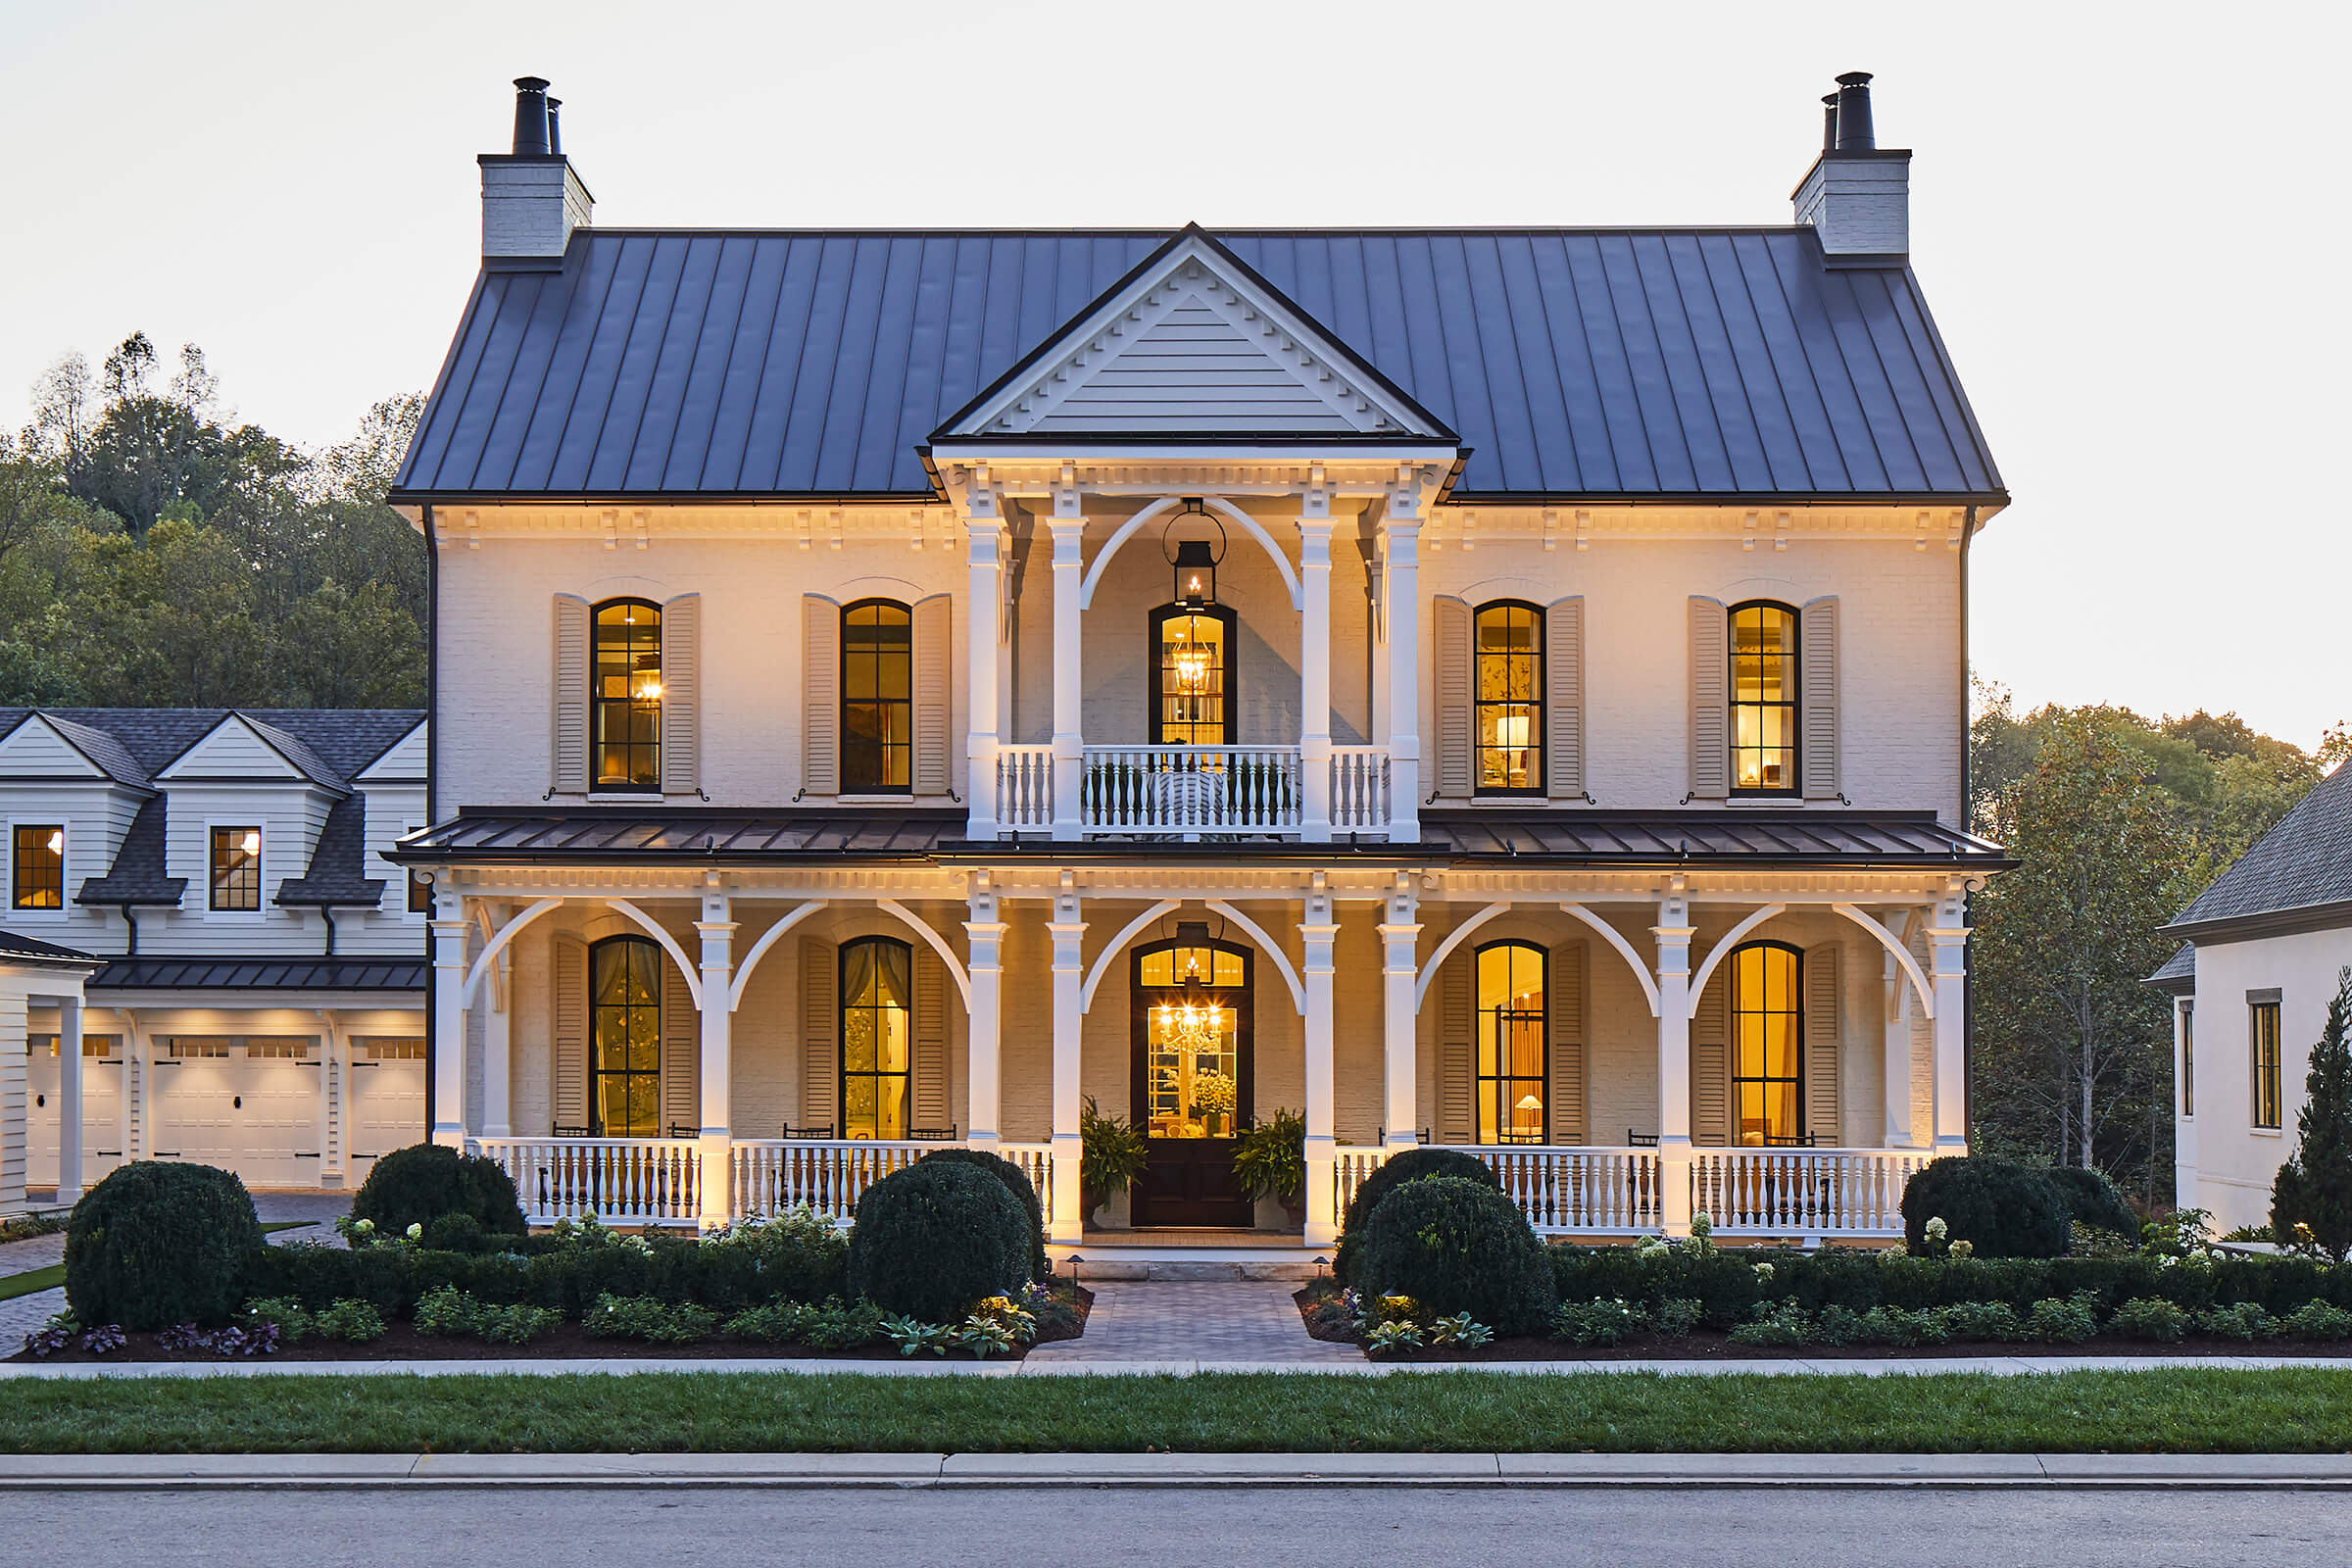 New construction inspired by the Historic Croft House in Nashville, TN.